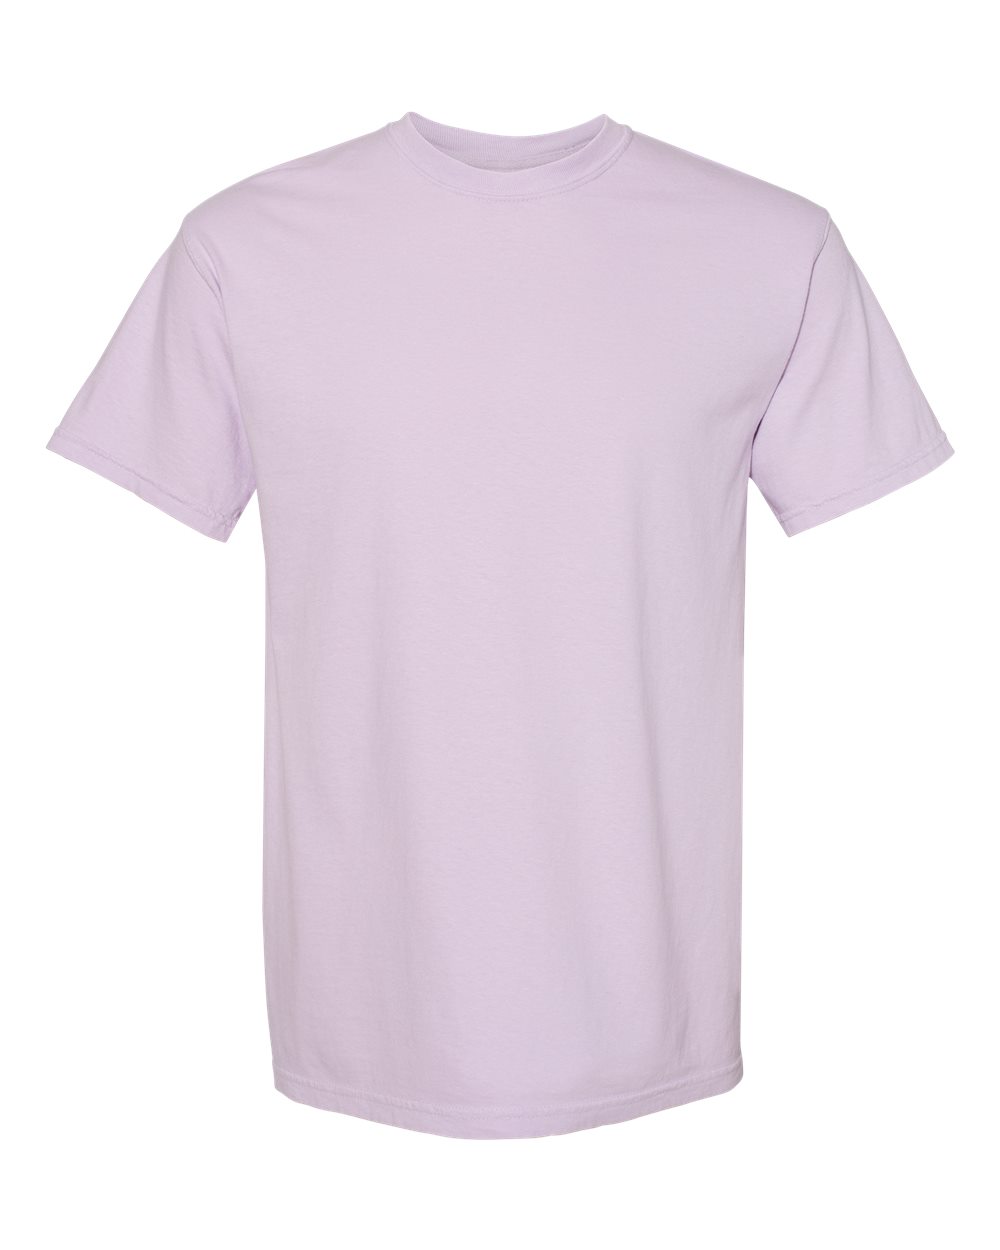 Comfort Colors Garment-Dyed Tee (1717) in Orchid